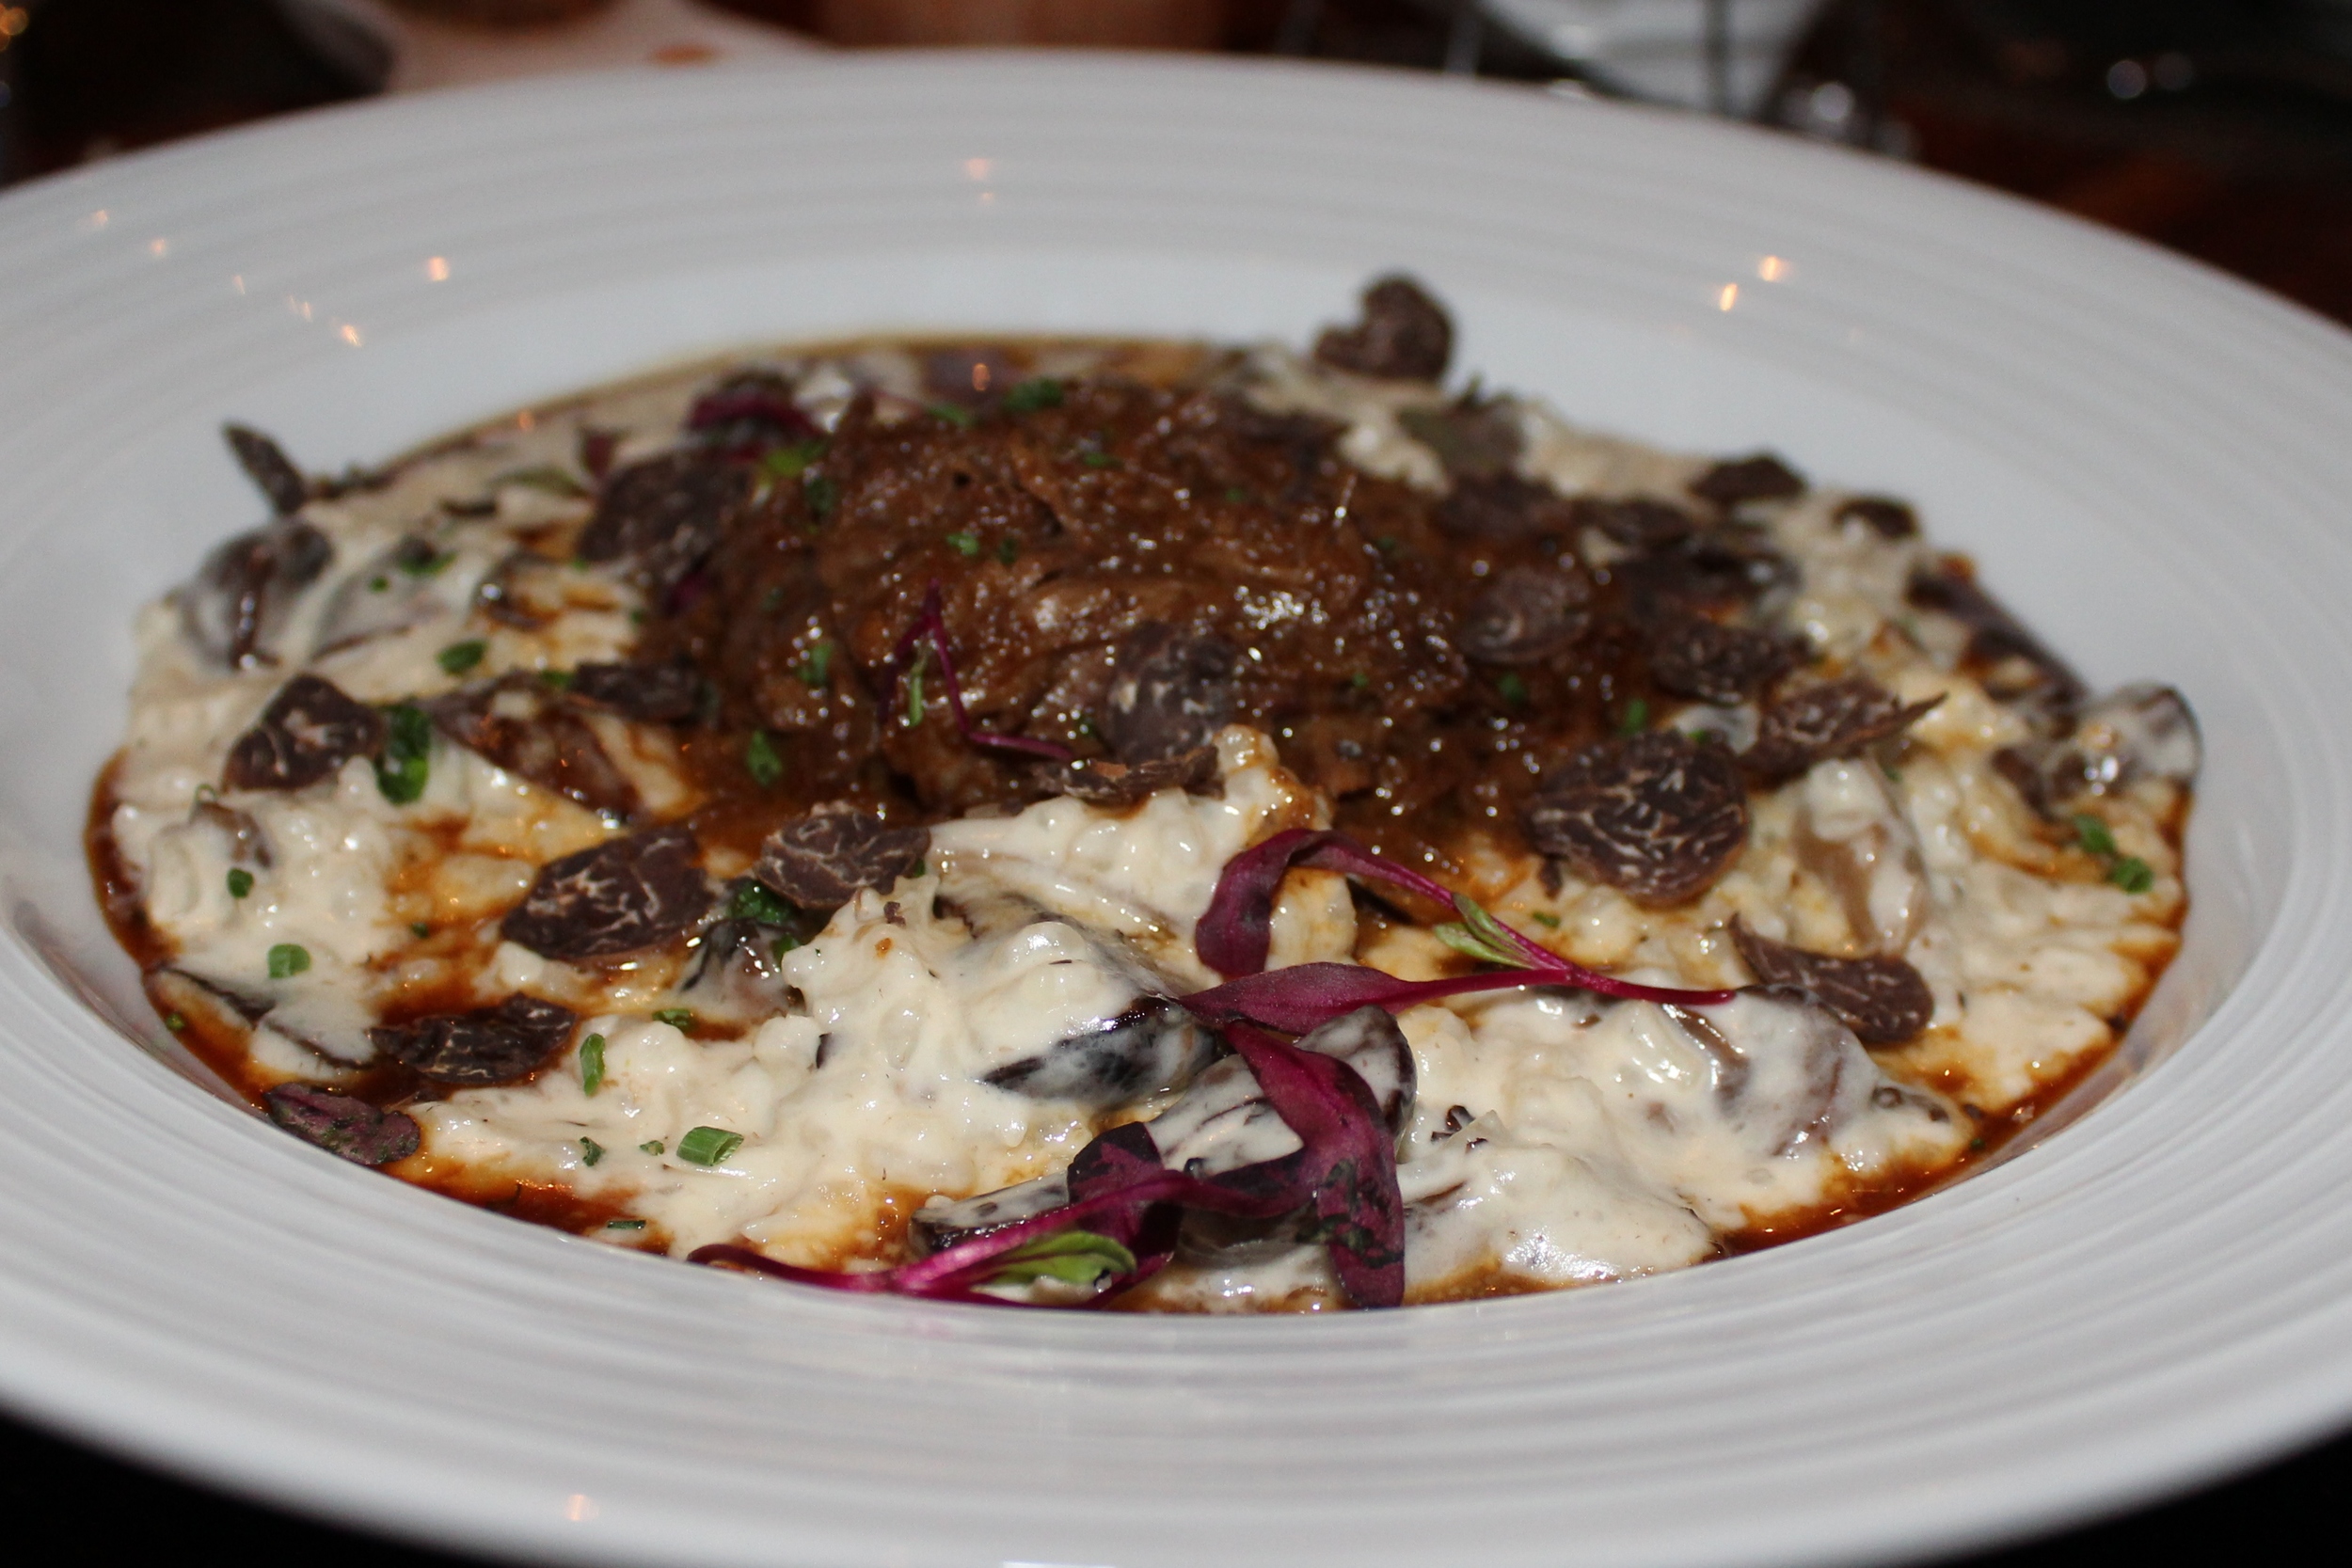 Parmesan risotto with short ribs and truffles.